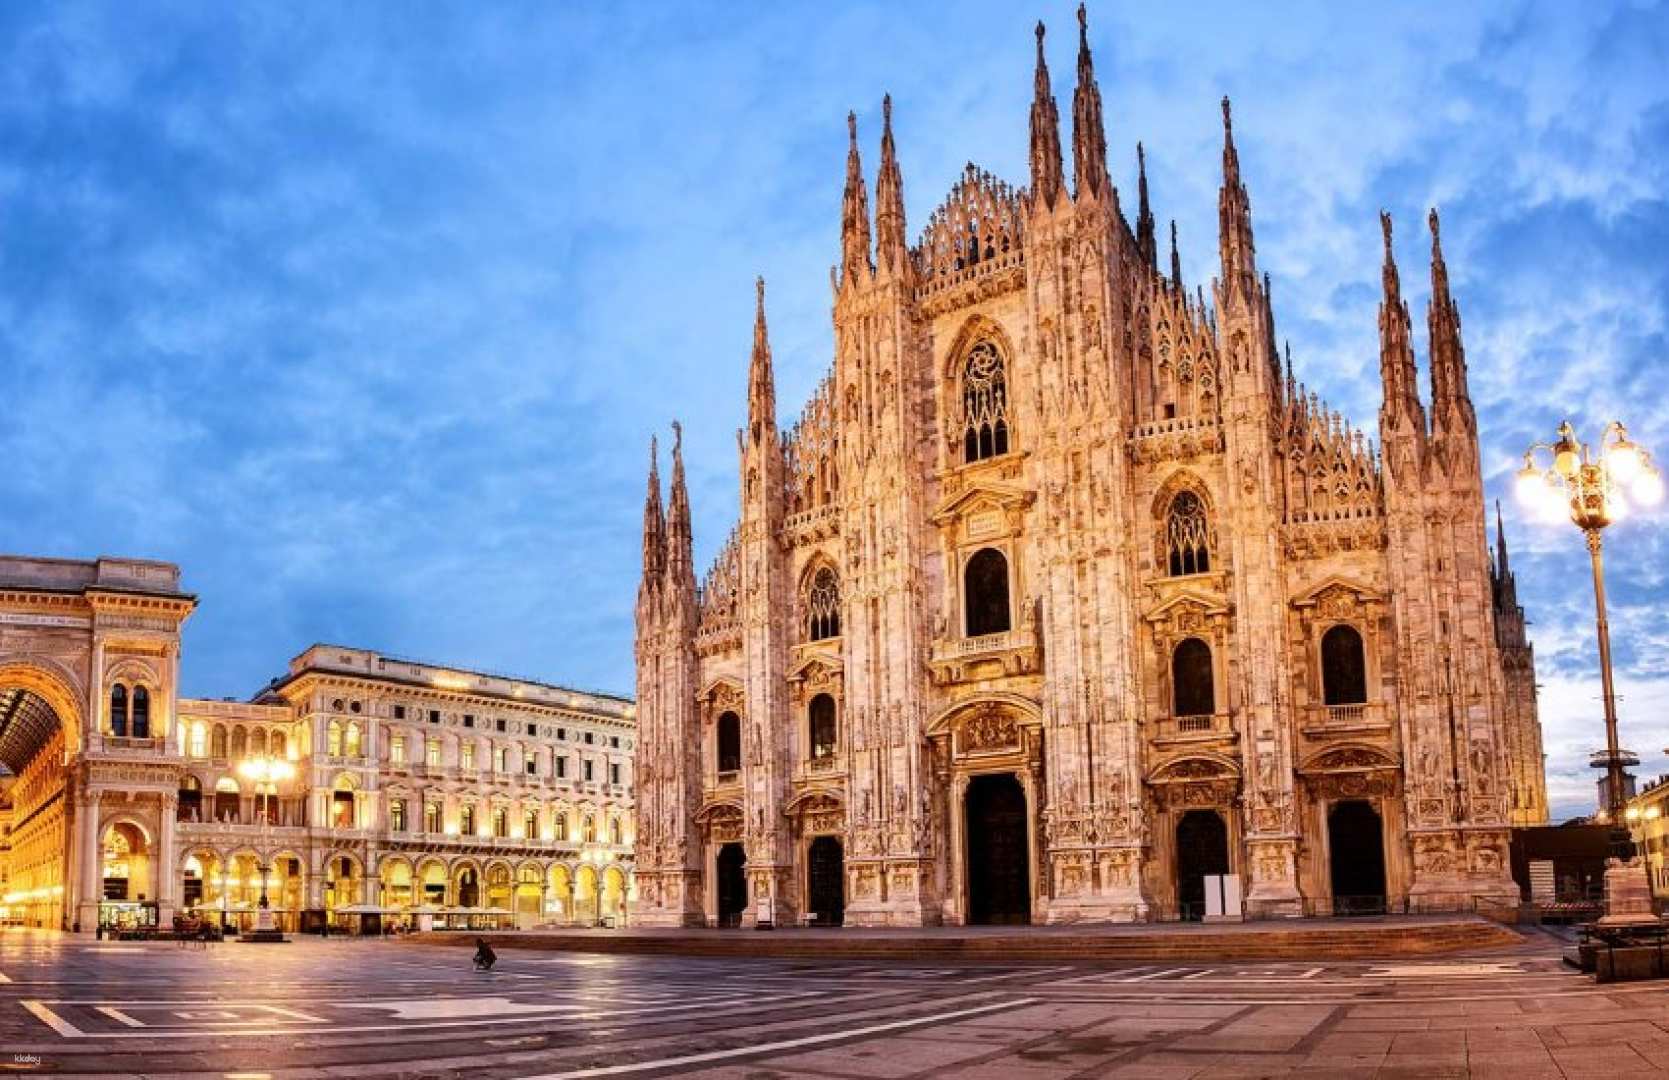 Milan Half-Day Tour: The Last Supper & Walking Tour | Italy